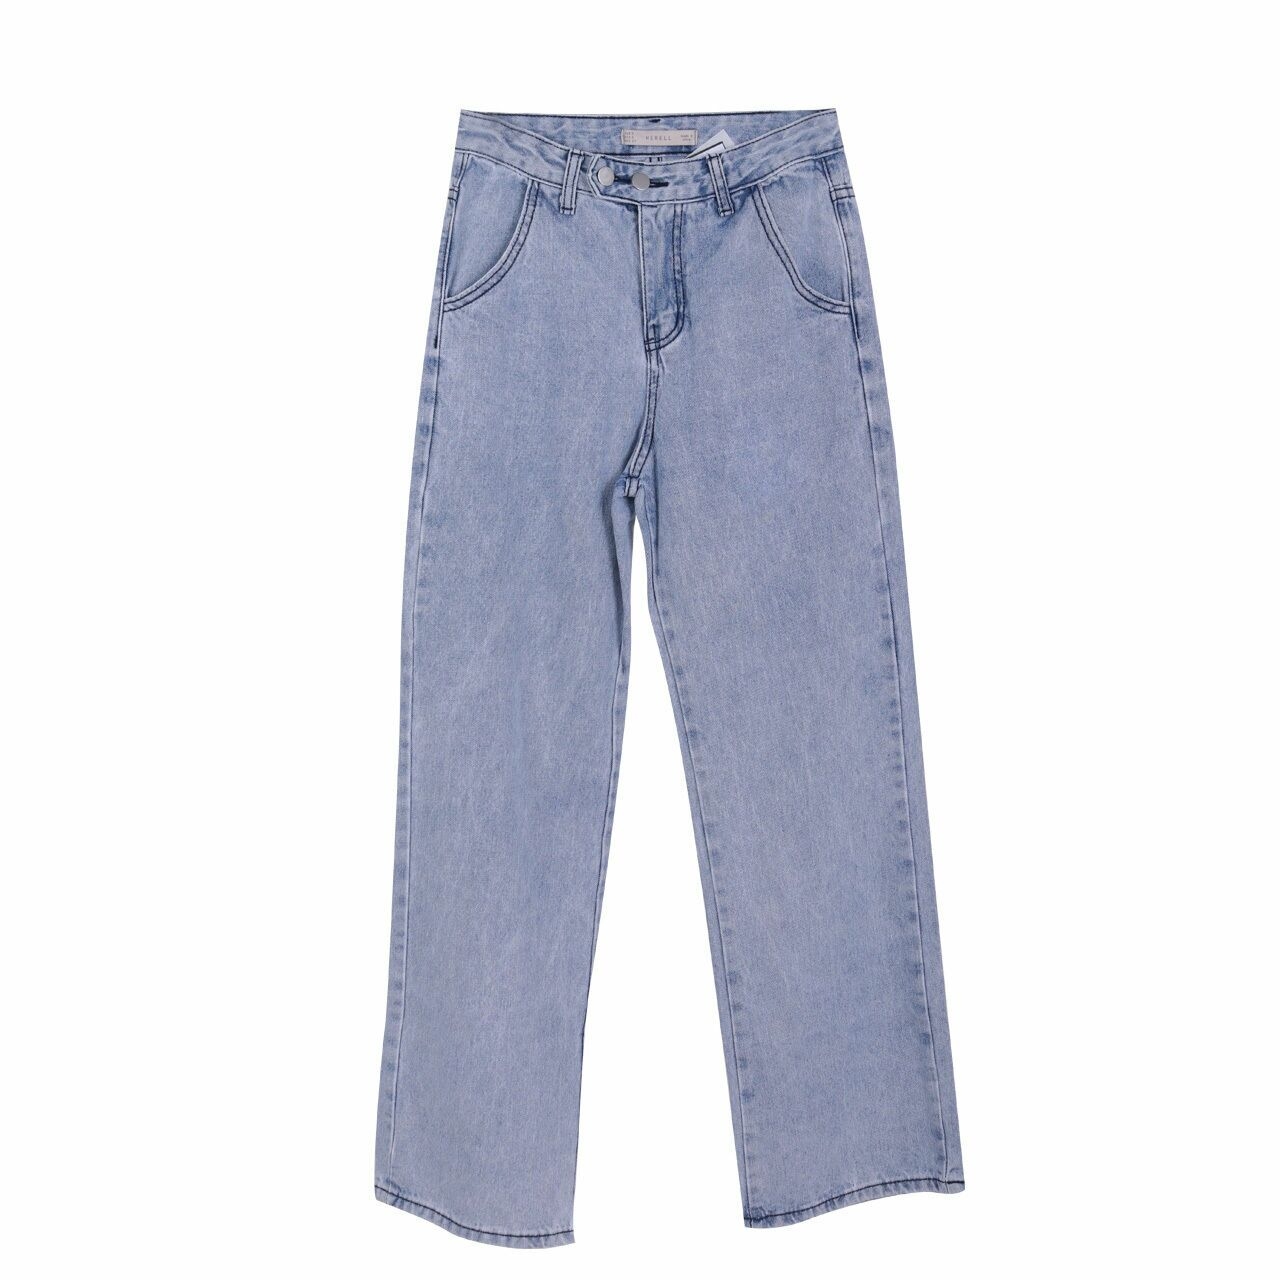 Herell Blue Jeans Long Pants